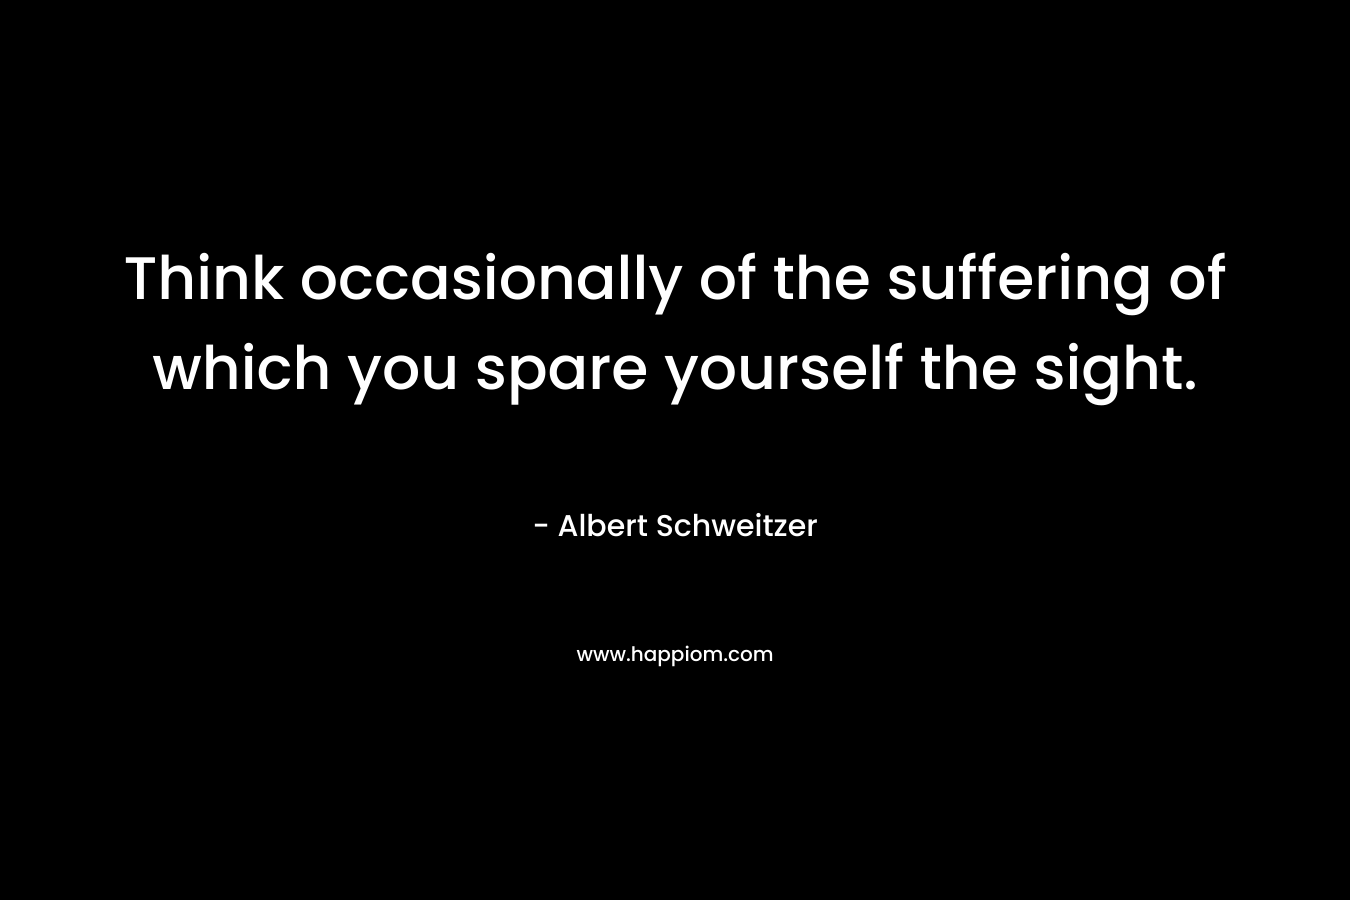 Think occasionally of the suffering of which you spare yourself the sight. – Albert Schweitzer